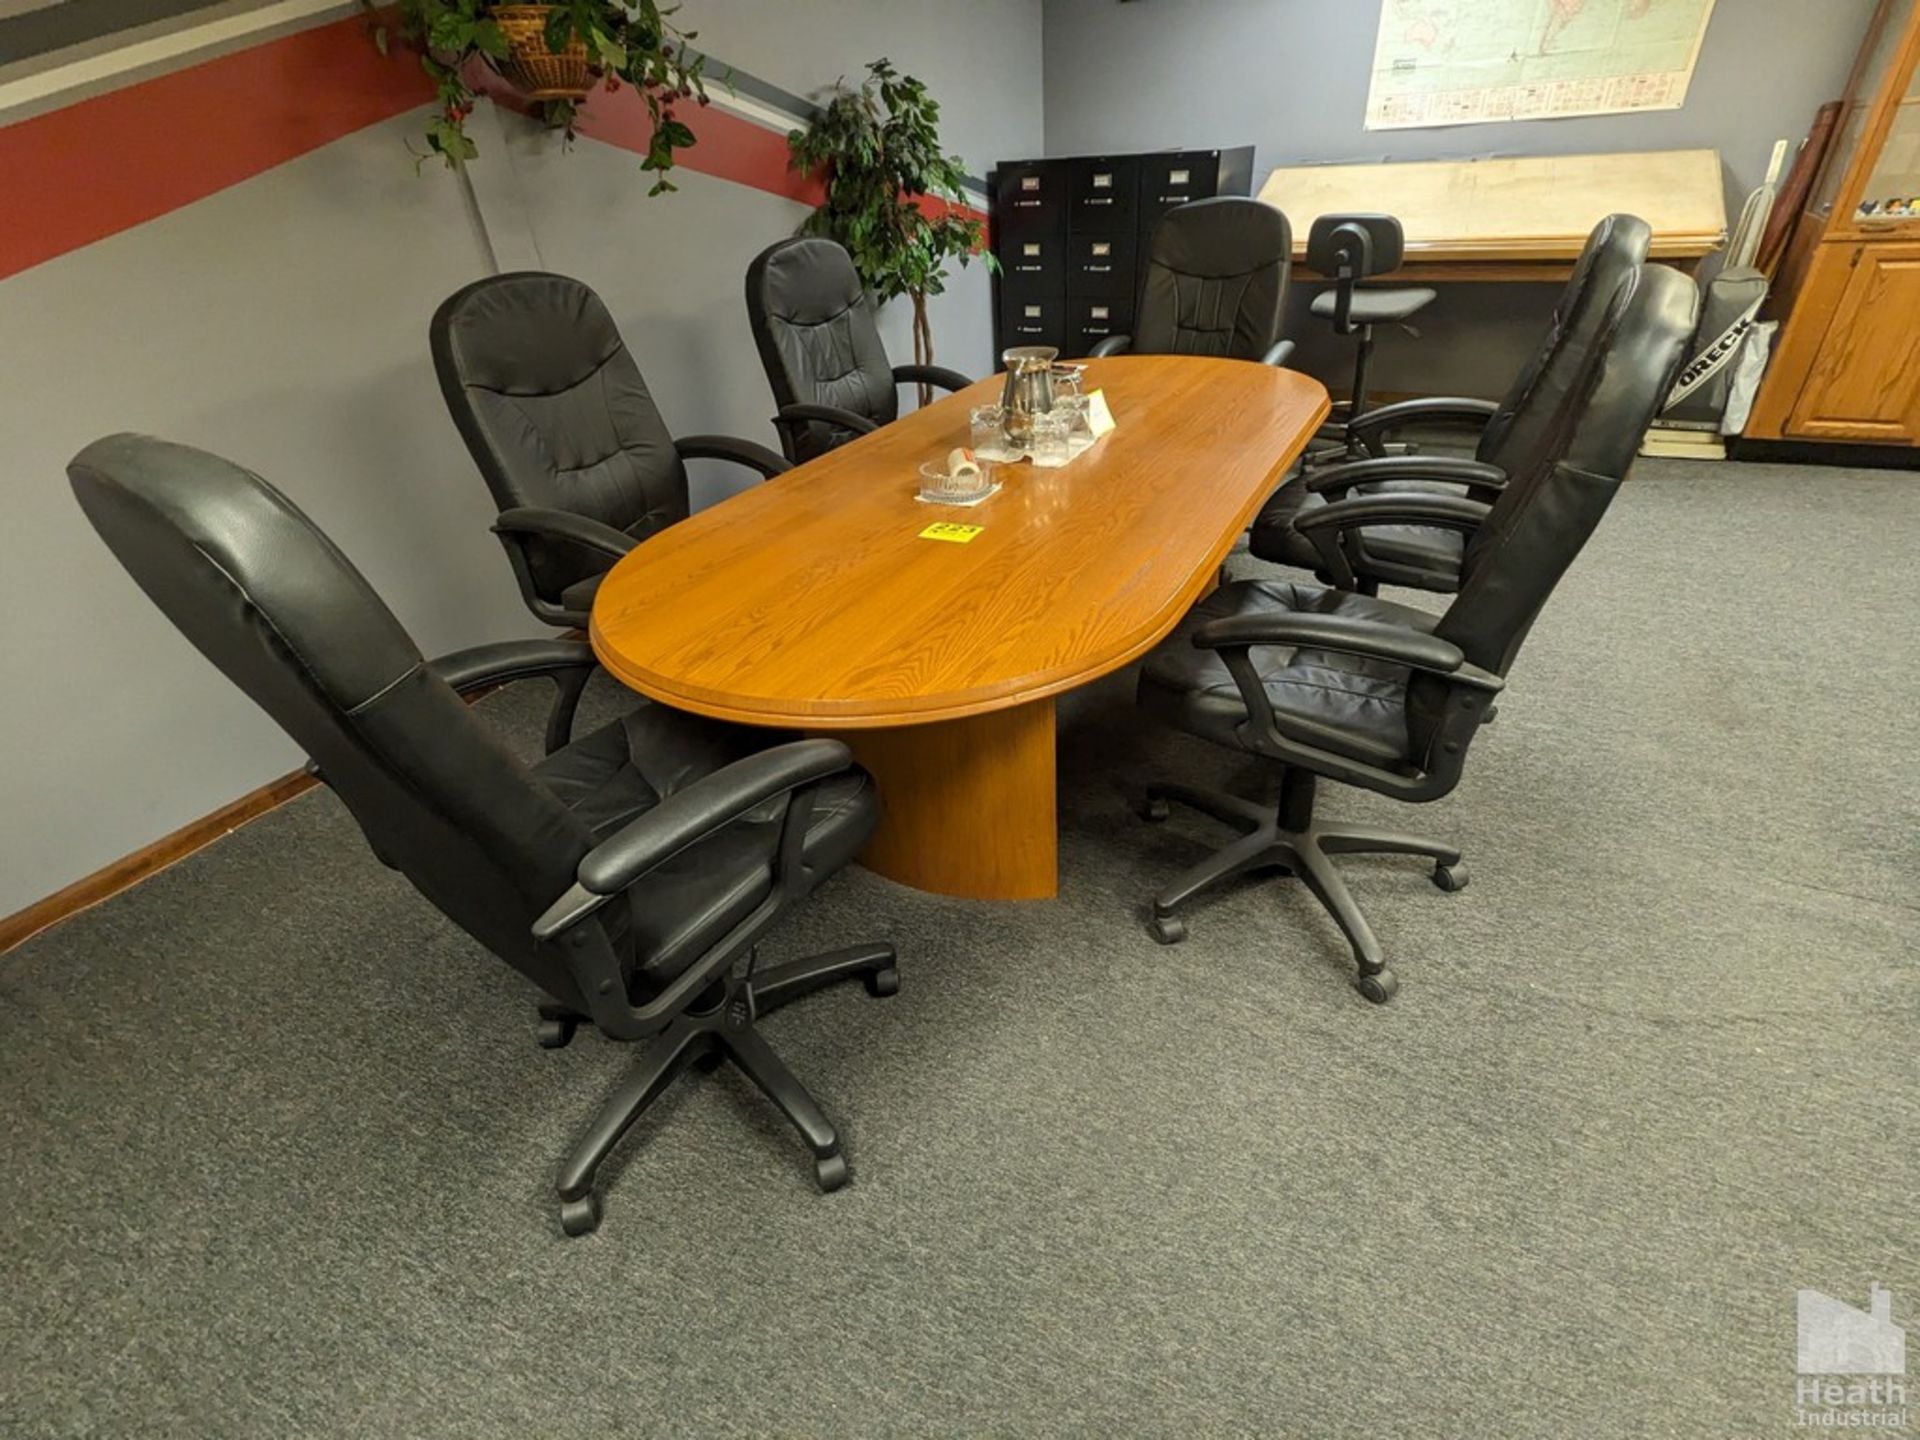 CONFERENCE TABLE WITH SIX EXECUTIVE ARM CHAIRS 8' X 42"